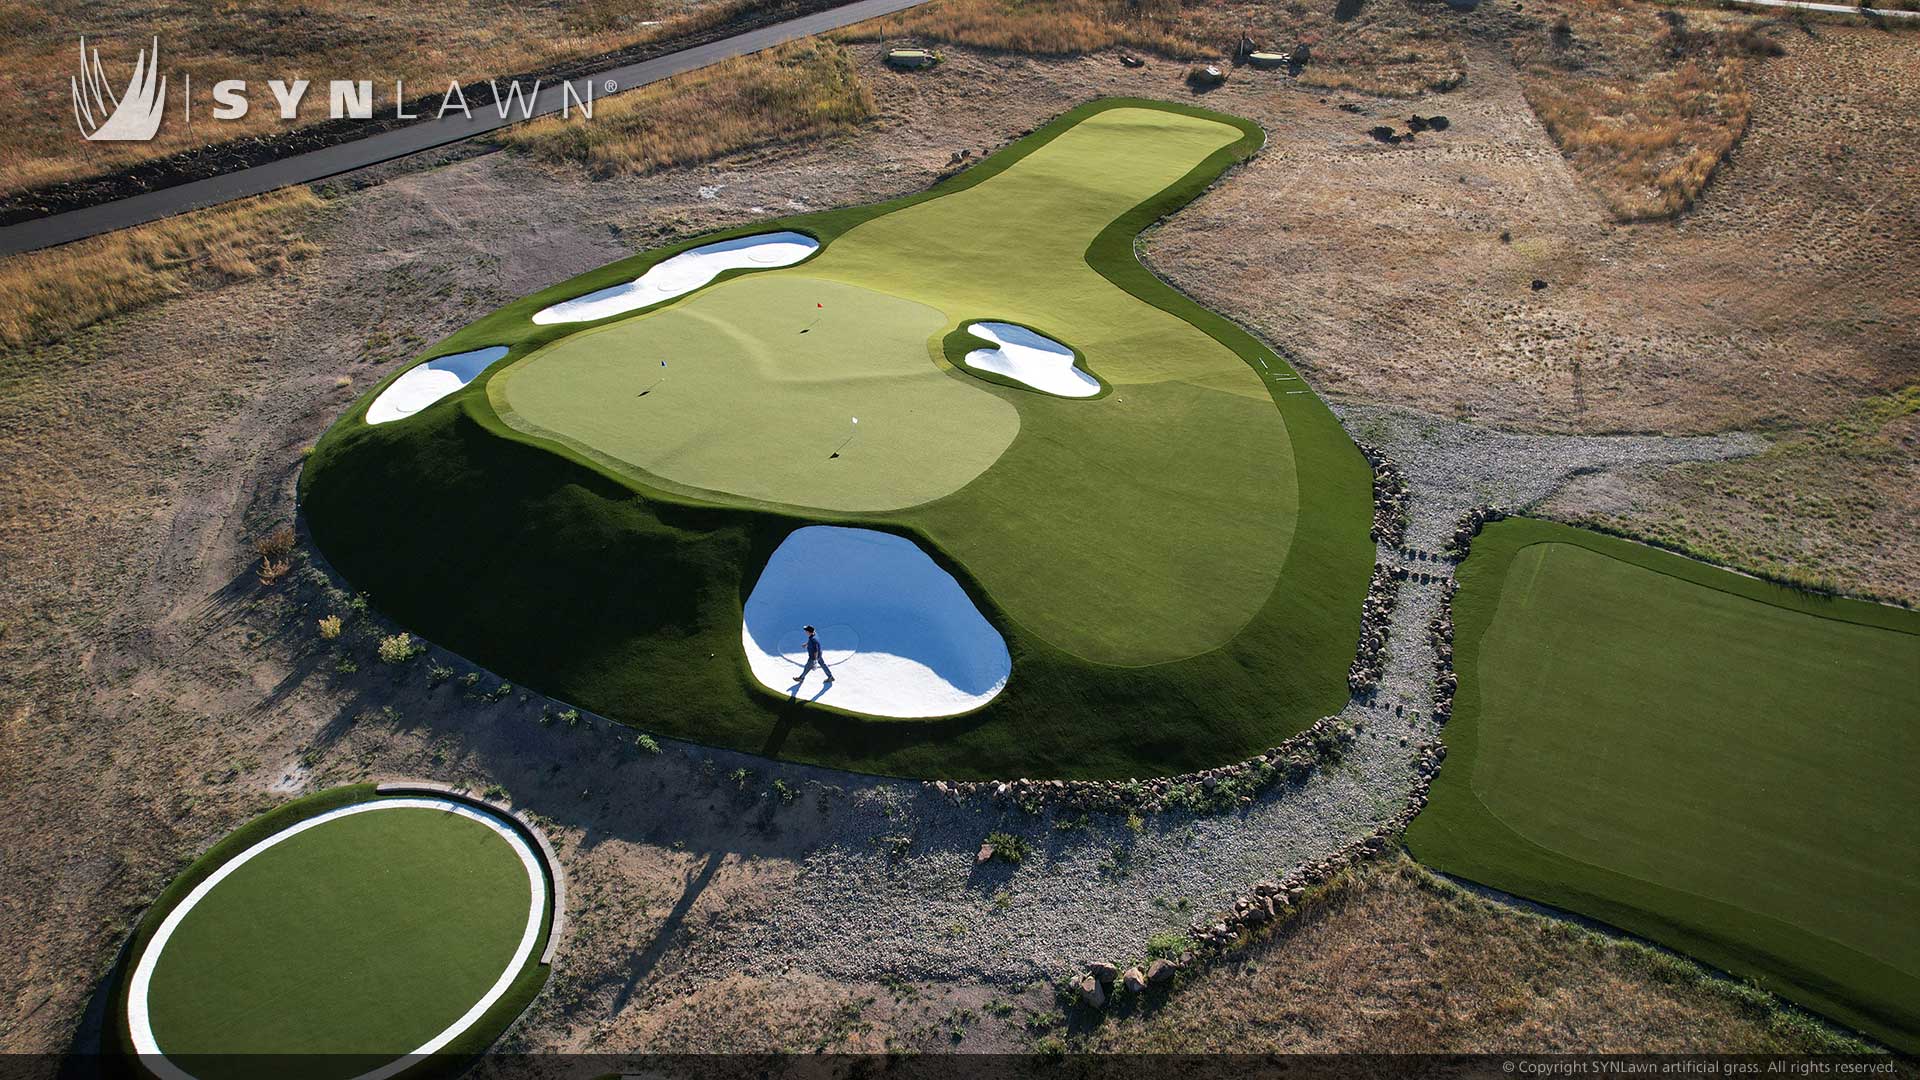 image of SYNLawn Golf synthetic grass at Windy Way Ranch in Golden Colorado